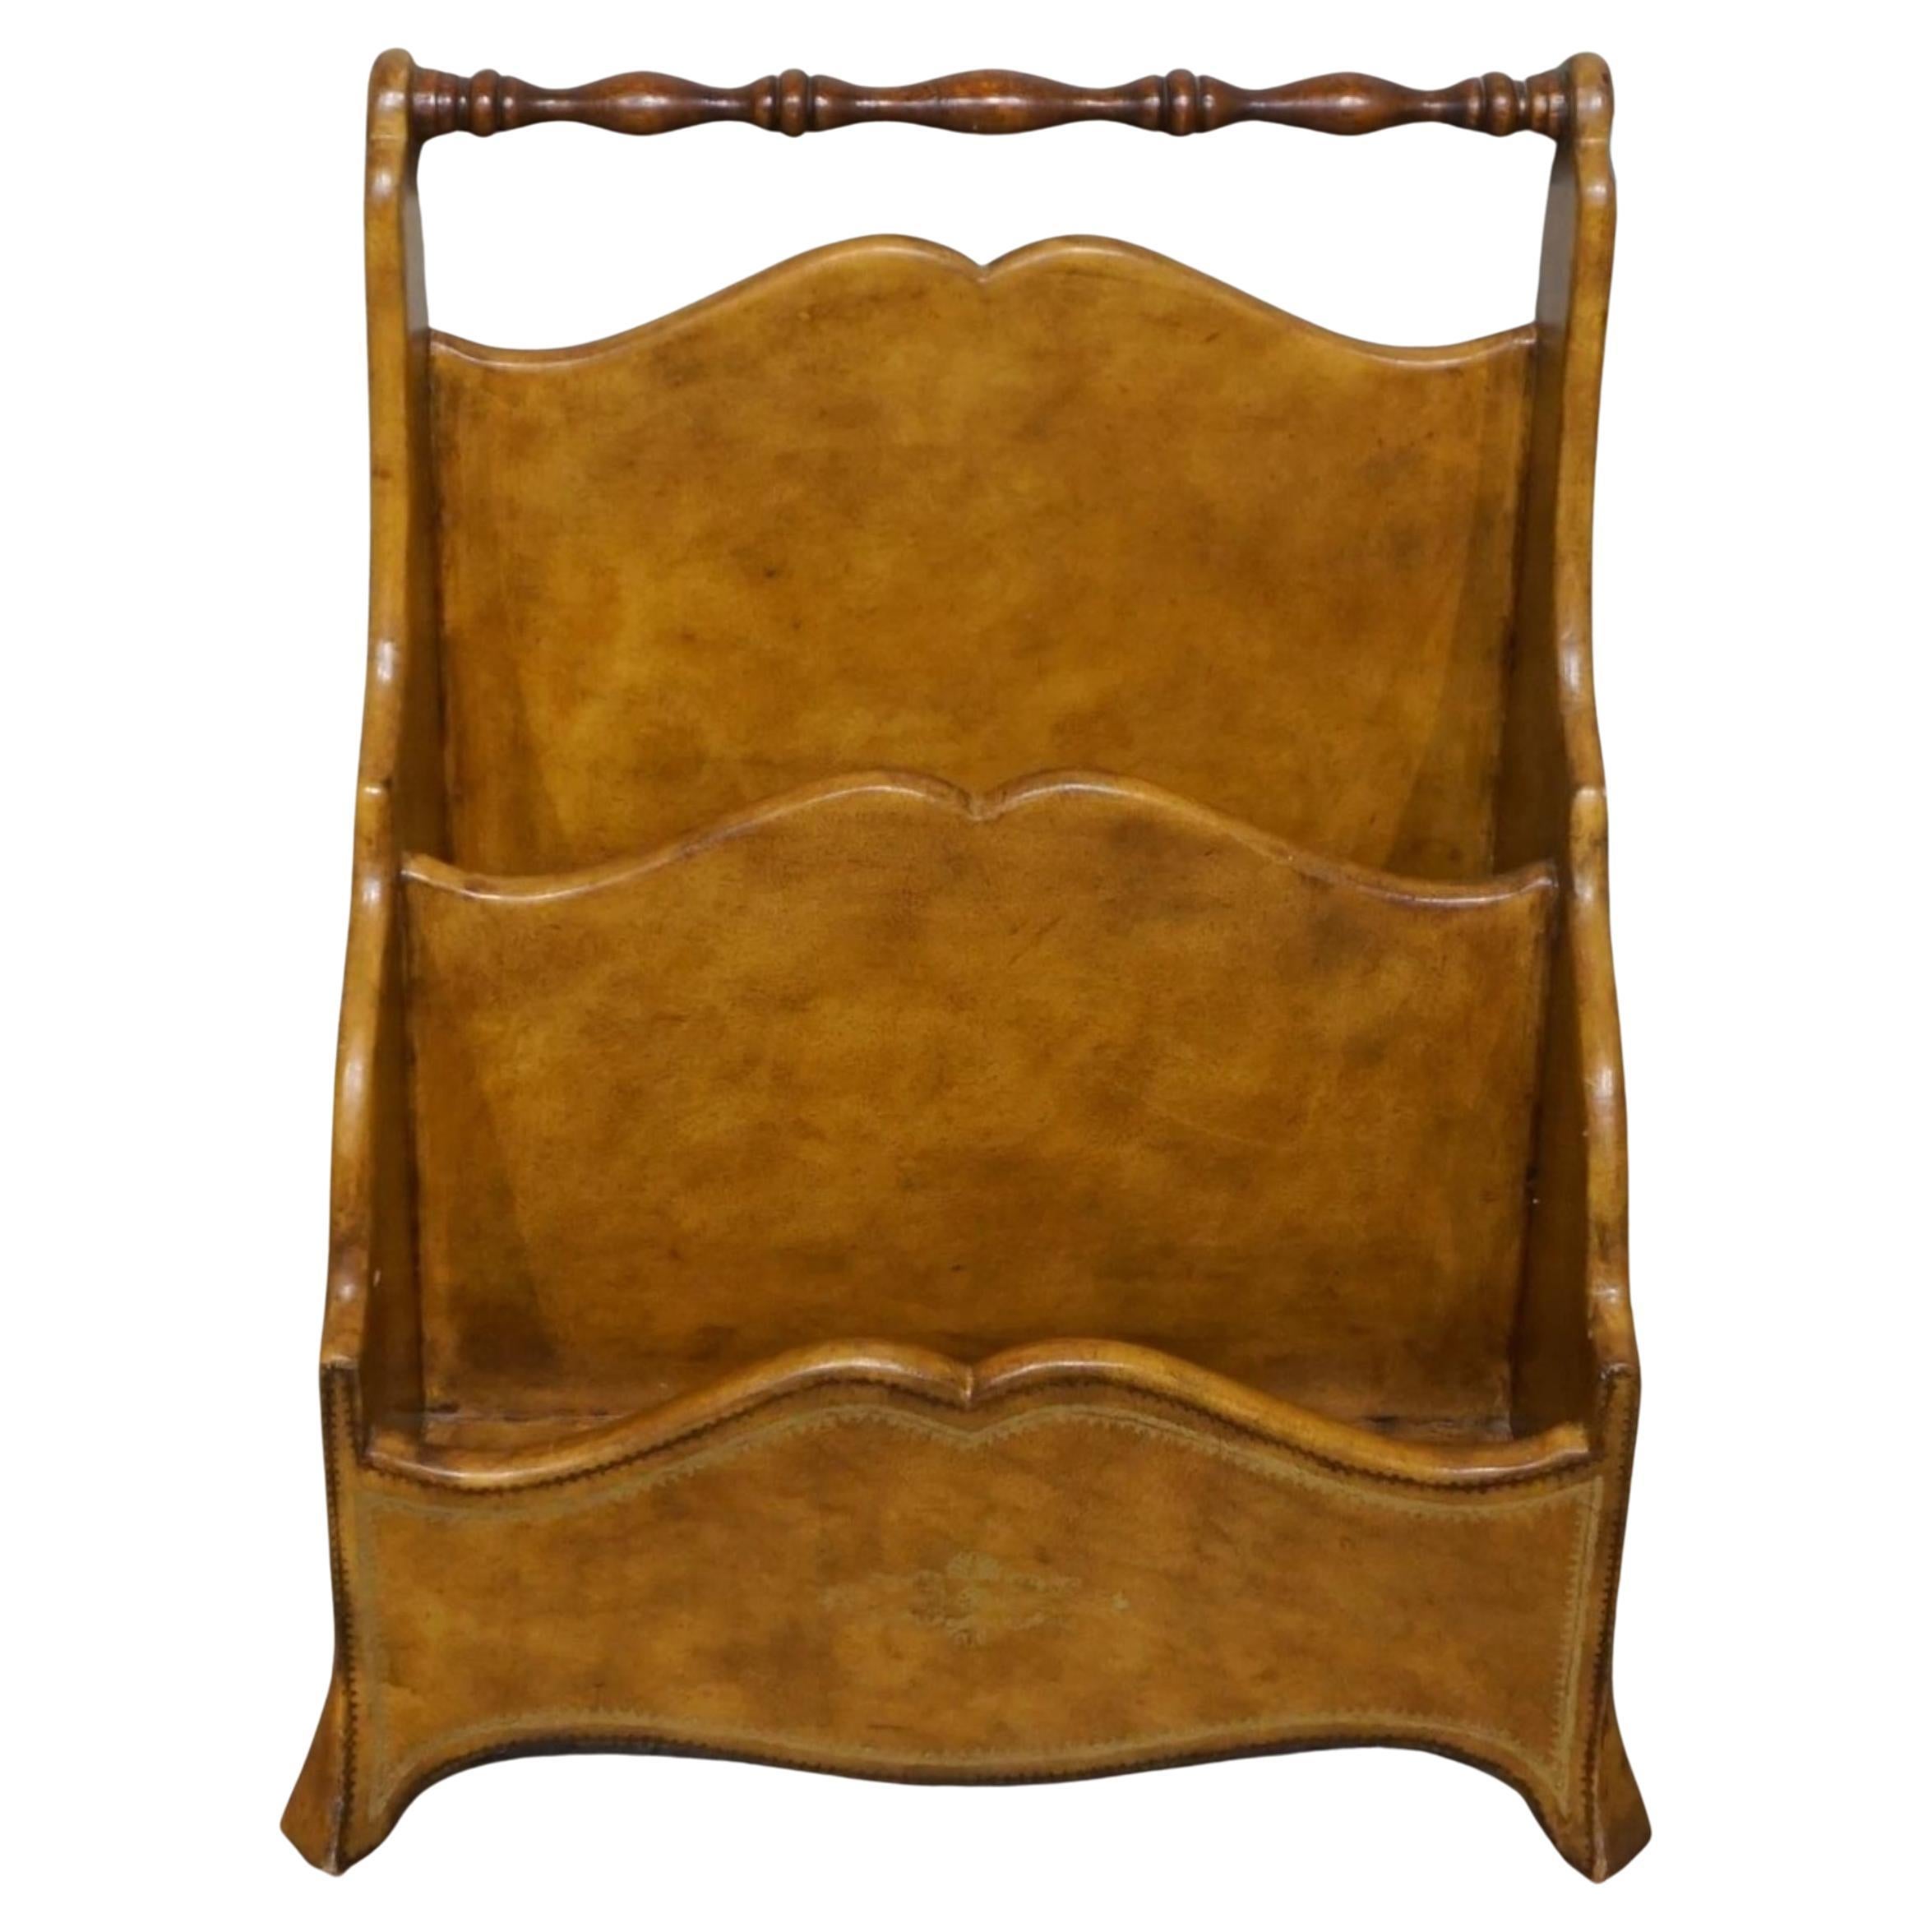 Maitland Smith Neoclassical Brown Leather Upholstered Magazine or Letter Stand For Sale 3